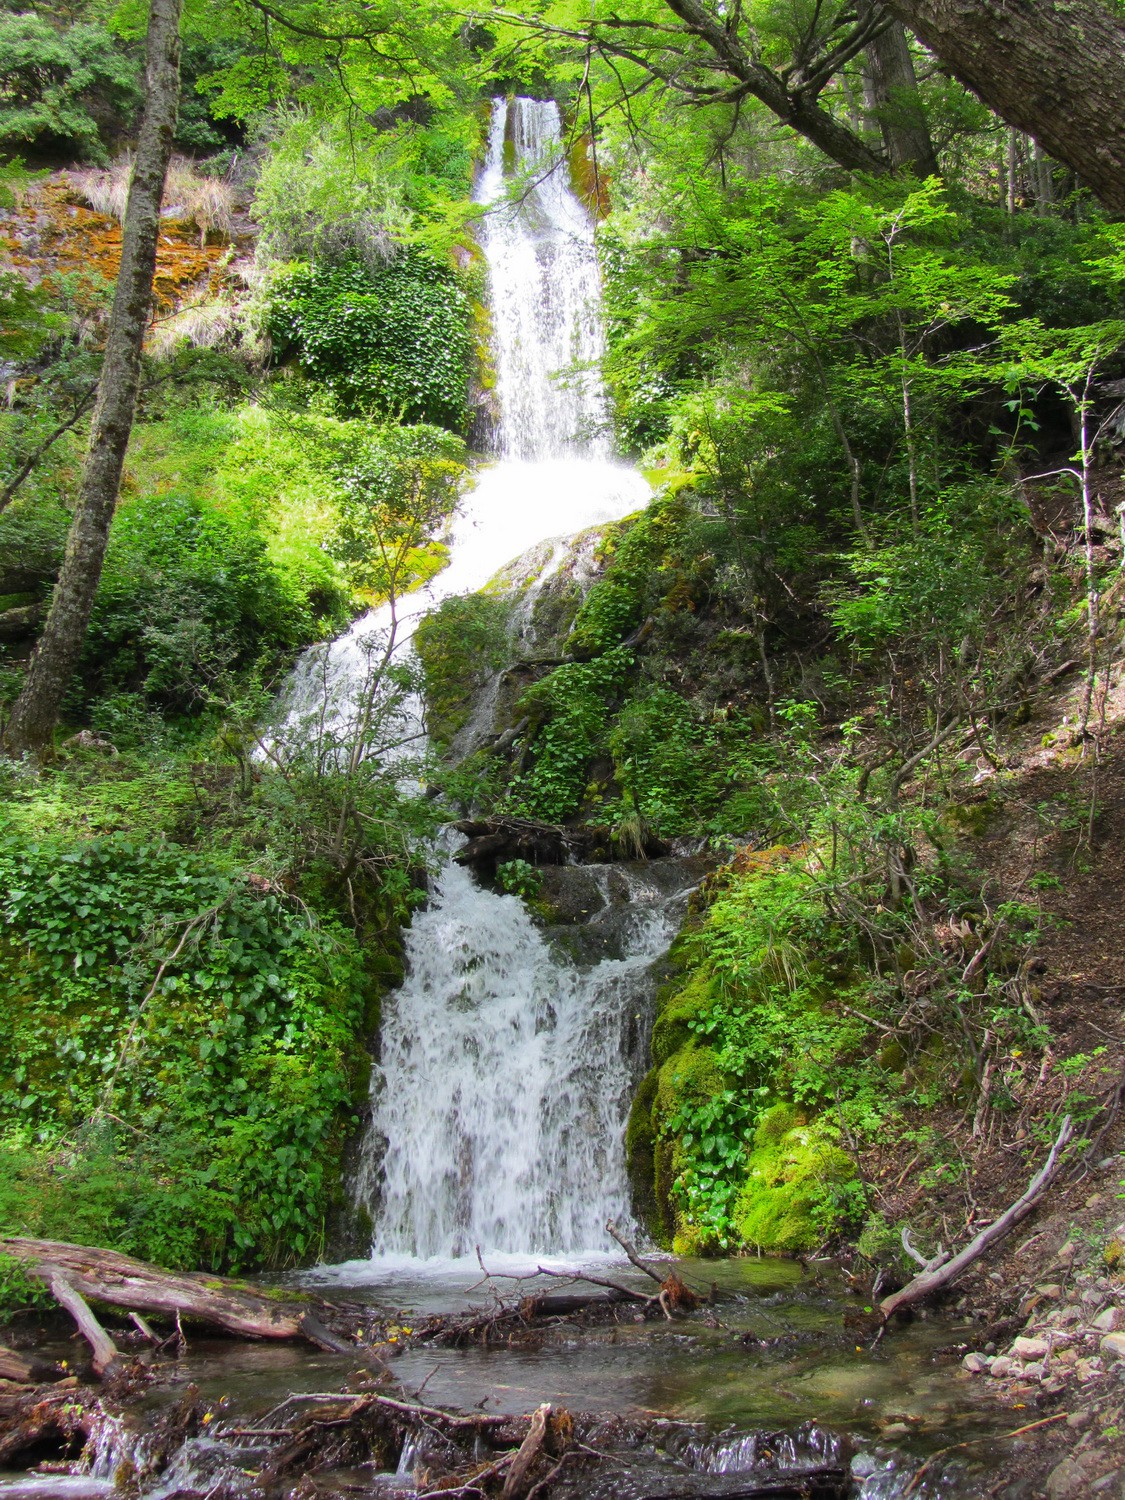 Waterfall on the east shore of Lago del Desierto